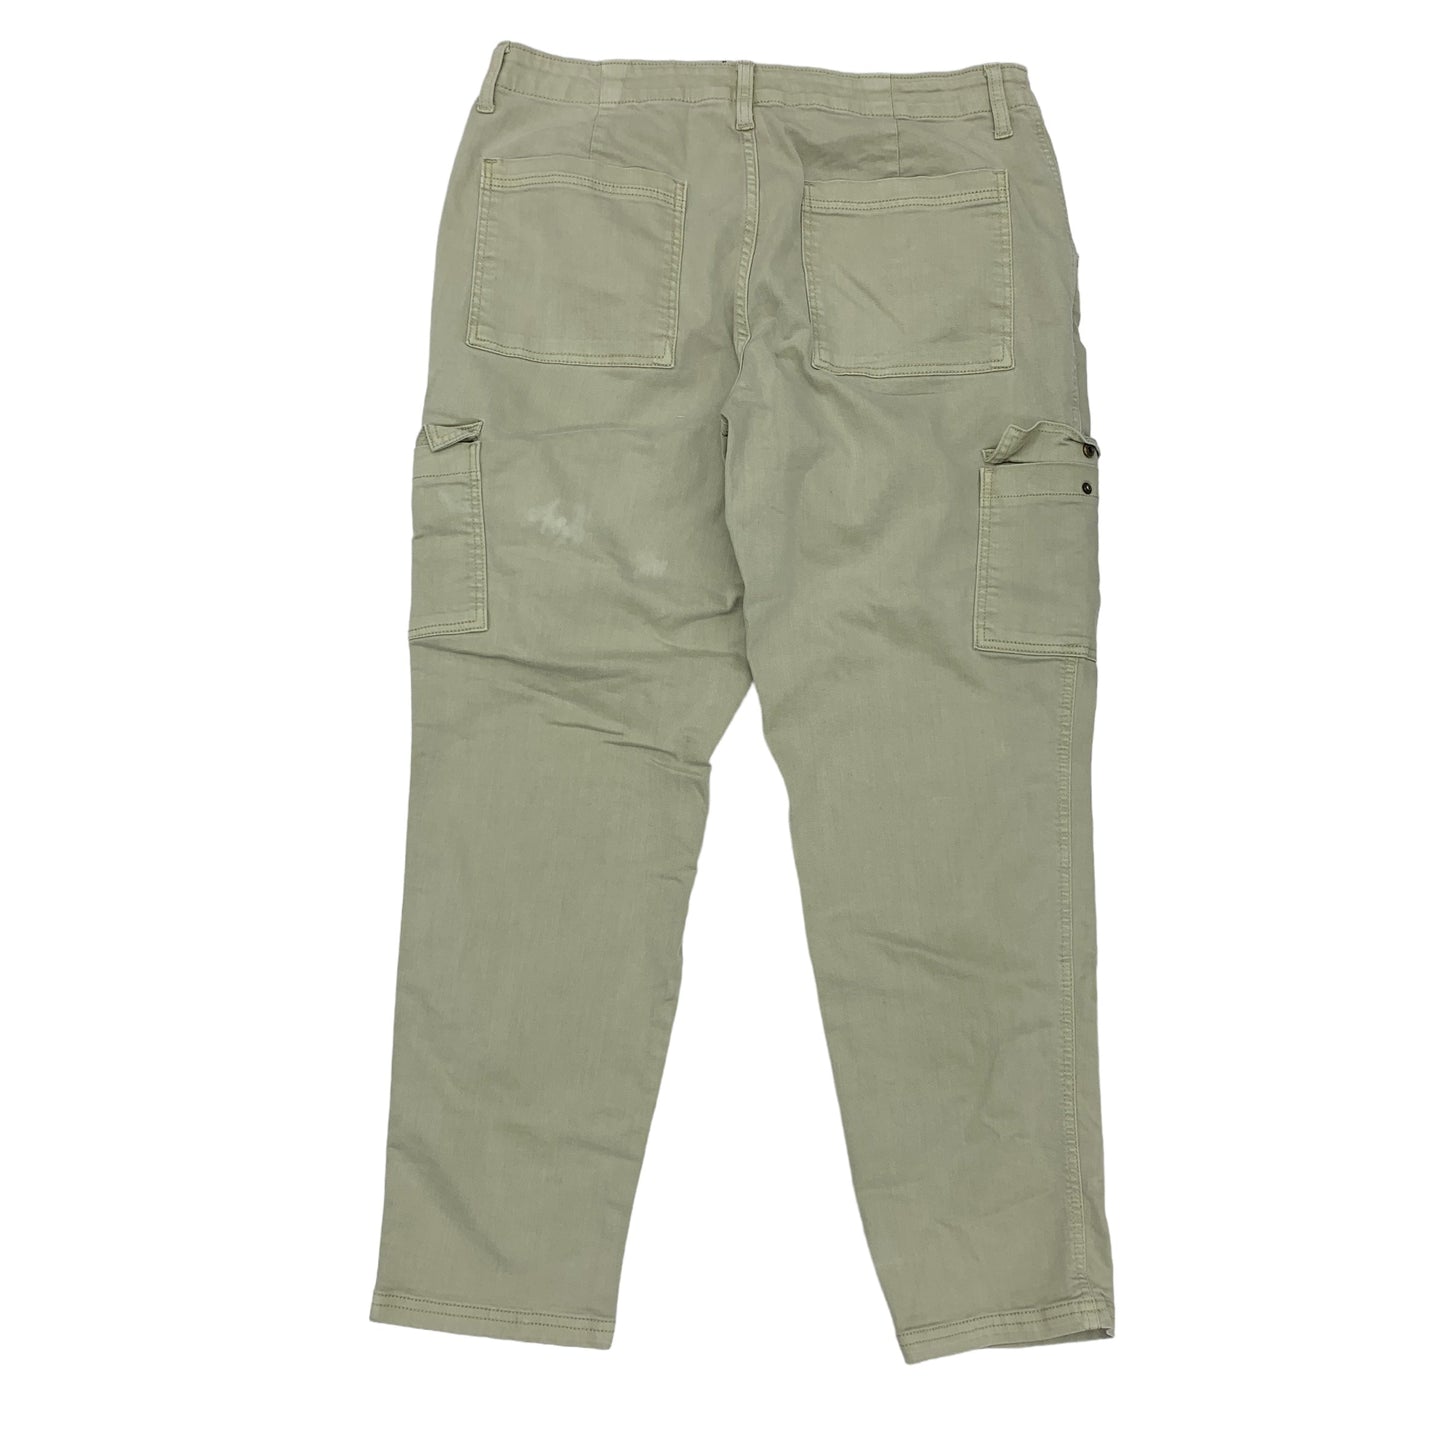 Pants Cargo & Utility By Universal Thread  Size: 16